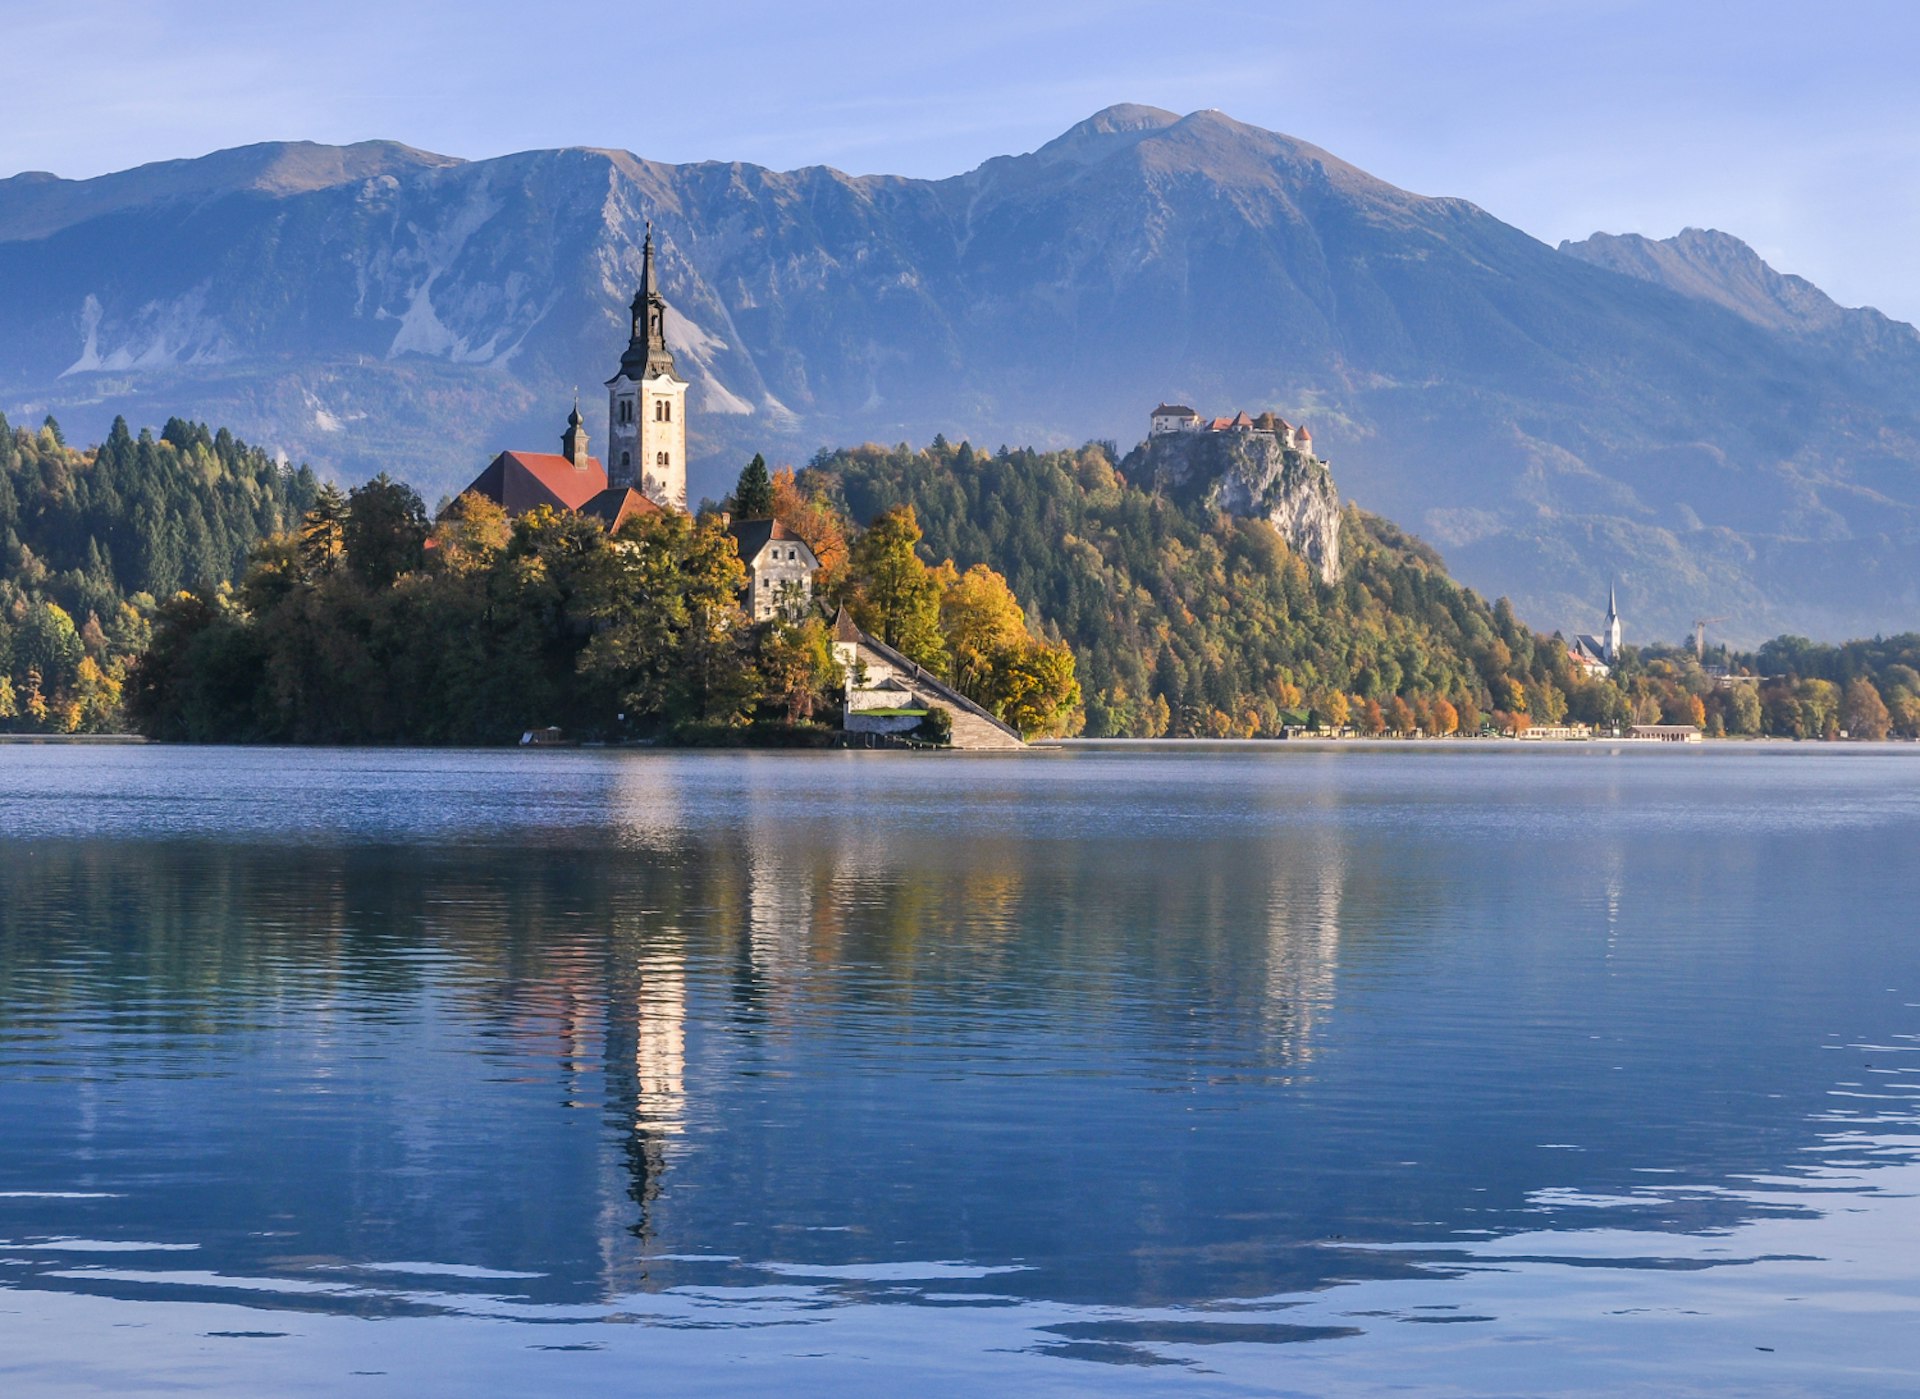 A church on an island in the middle of a lake. A castle sits on a rocky outcrop behind the island, and there are mountains in the distance.